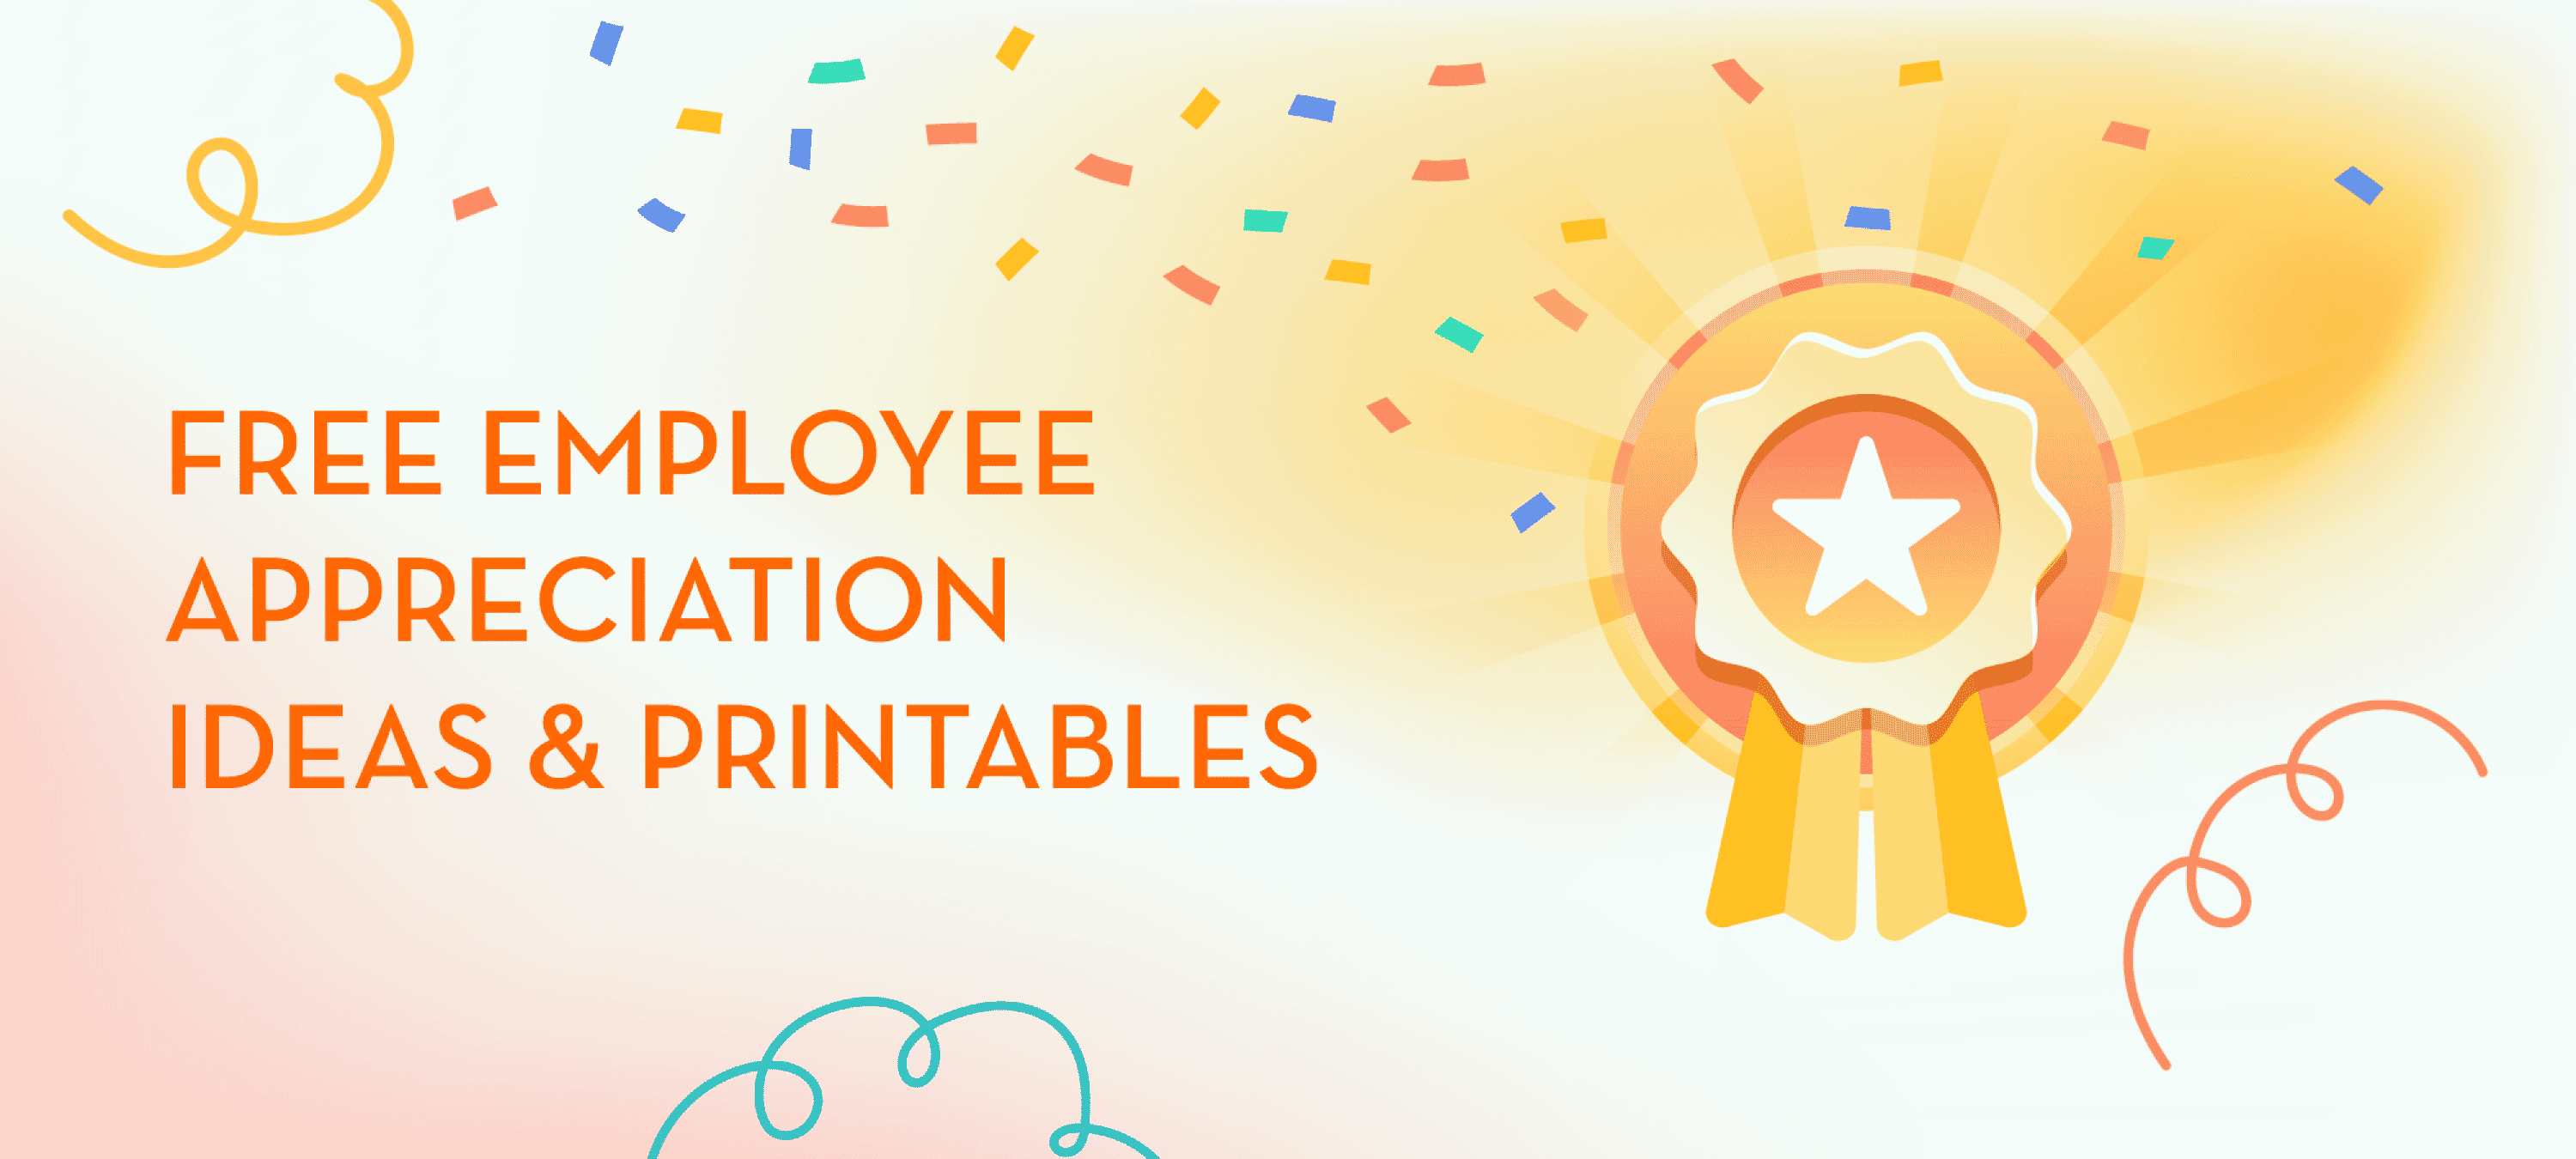 Outsmart Inflation with Free Employee Appreciation Ideas & No-Cost Staff Recognition Printables